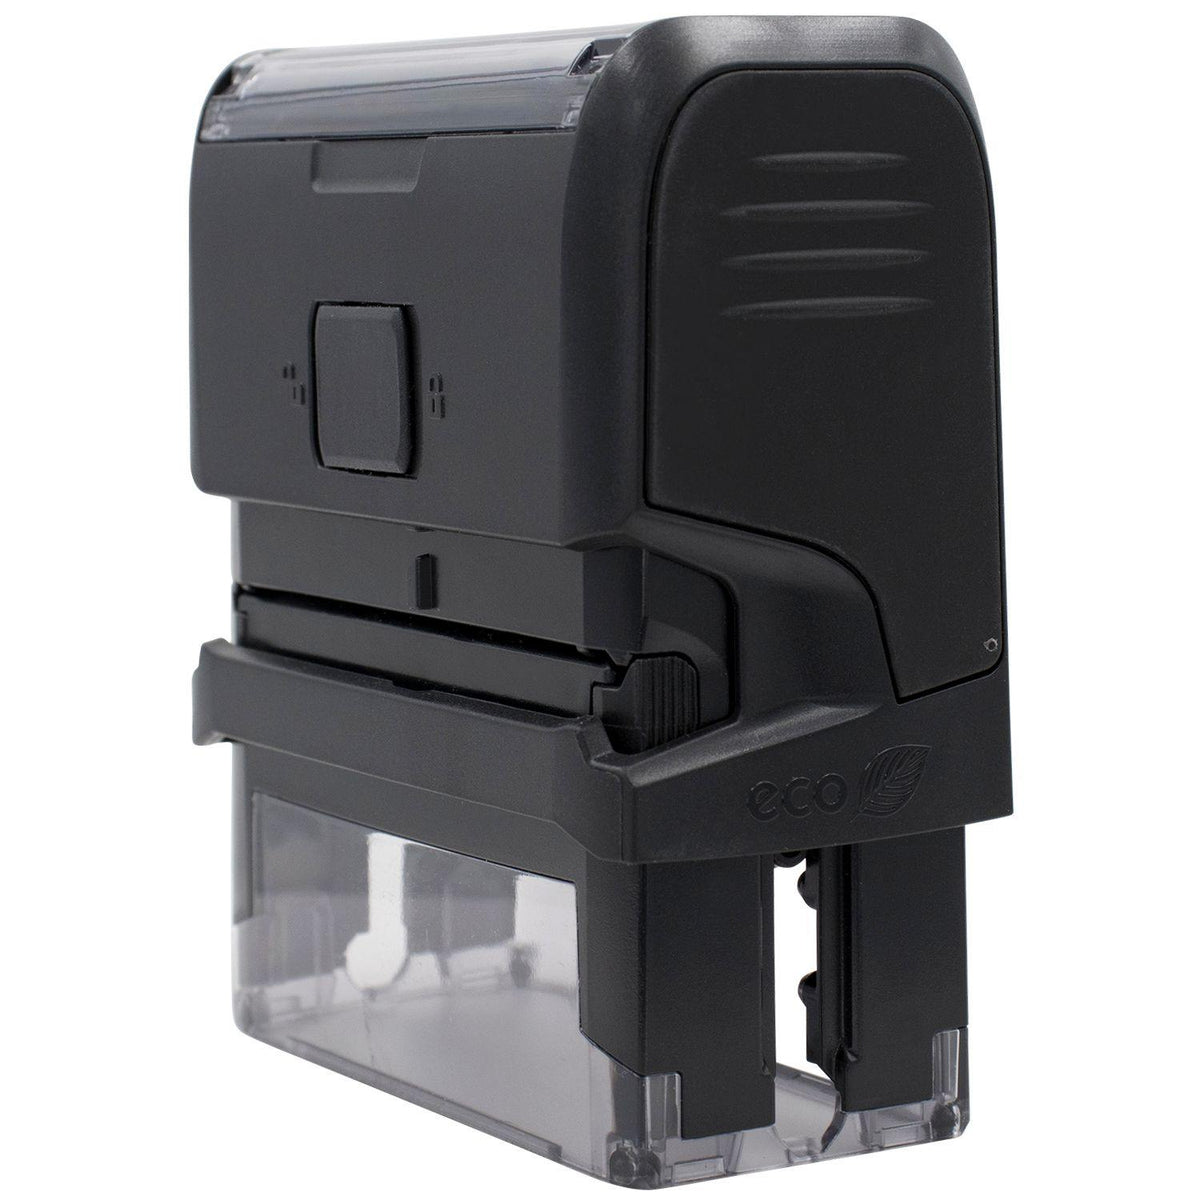 Large Self Inking Fragile Stamp - Engineer Seal Stamps - Brand_Trodat, Impression Size_Large, Stamp Type_Self-Inking Stamp, Type of Use_Postal &amp; Mailing, Type of Use_Shipping &amp; Receiving